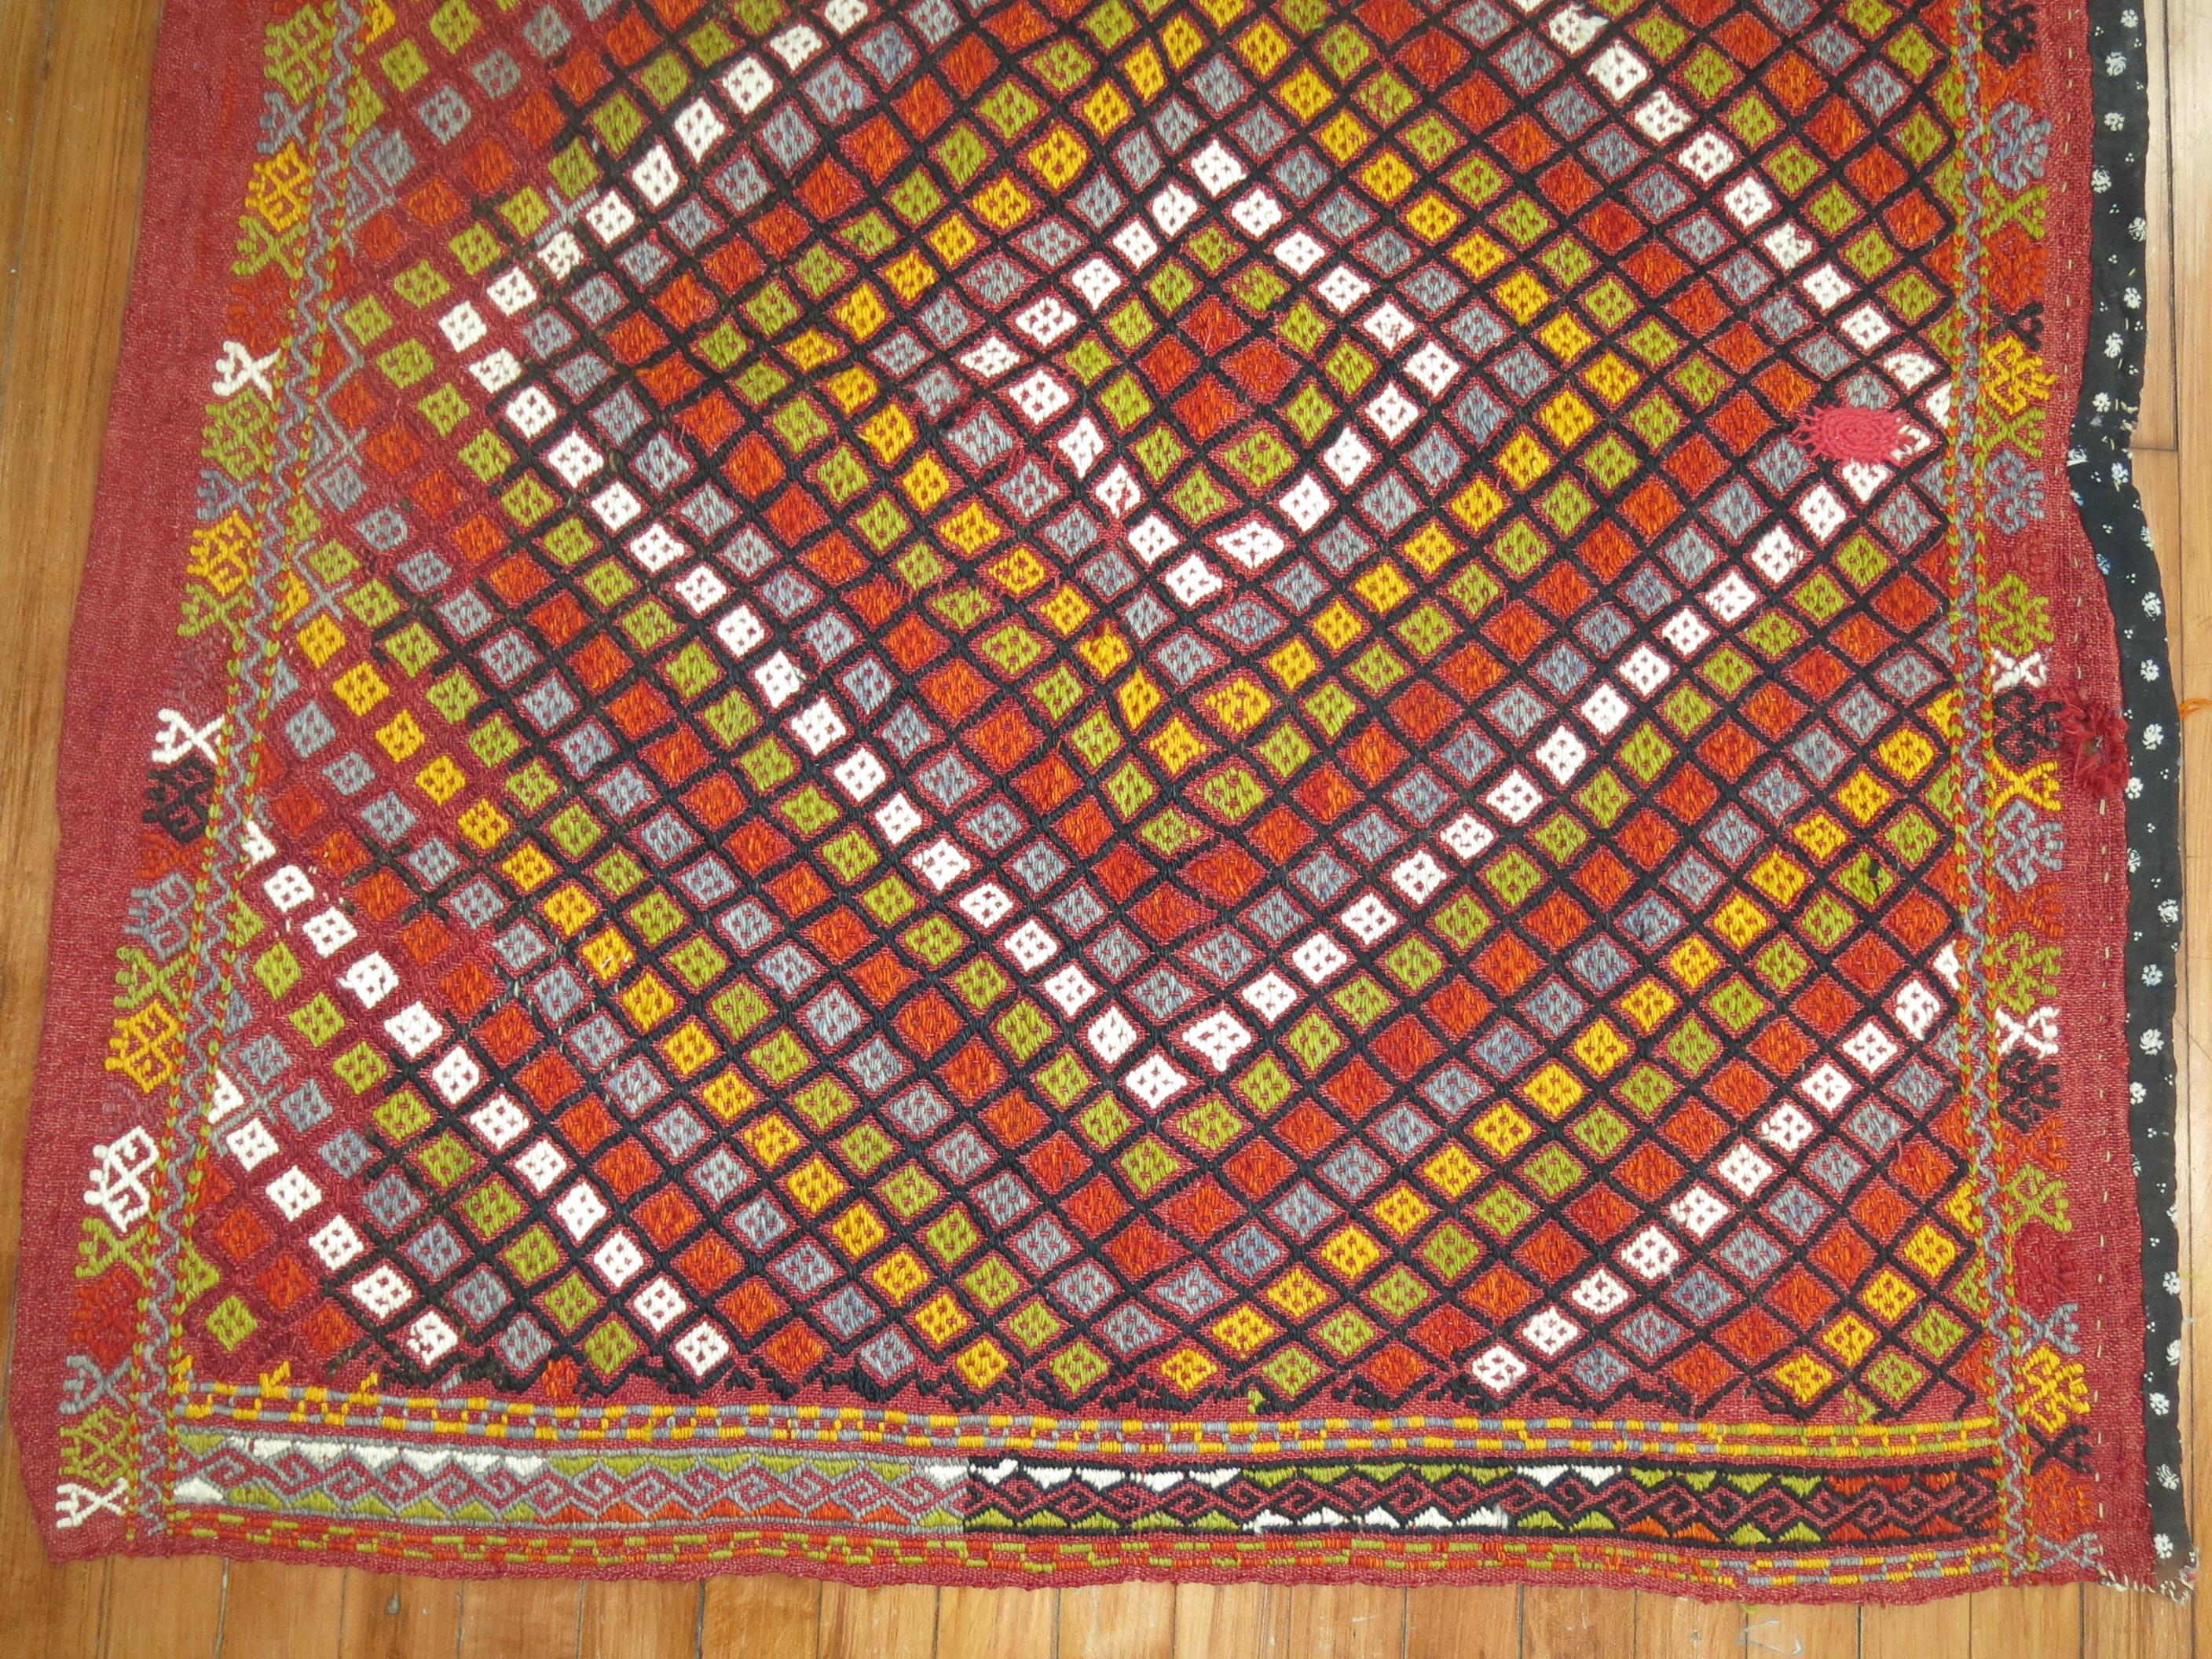 Colorful midcentury Turkish Jajim. Dominant accents in orange, yellow, green.

Measures: 3'6” x 4'2”

With the Jijim weaving technique, different colored threads are applied between the weft and warp threads, on the reverse of the weave. It is